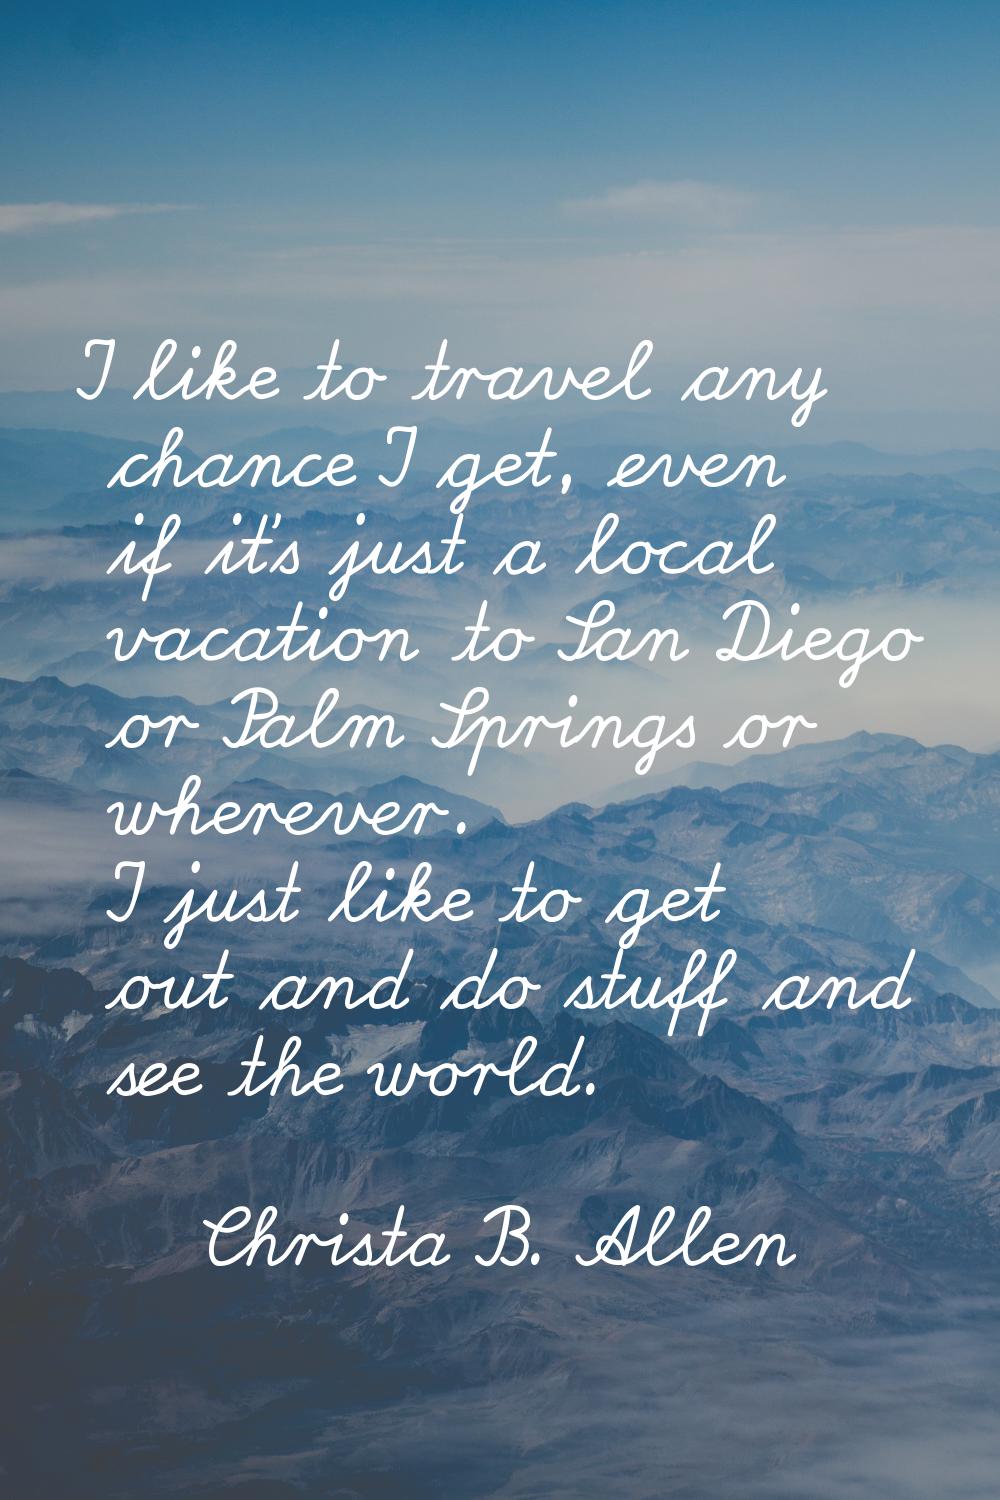 I like to travel any chance I get, even if it's just a local vacation to San Diego or Palm Springs 